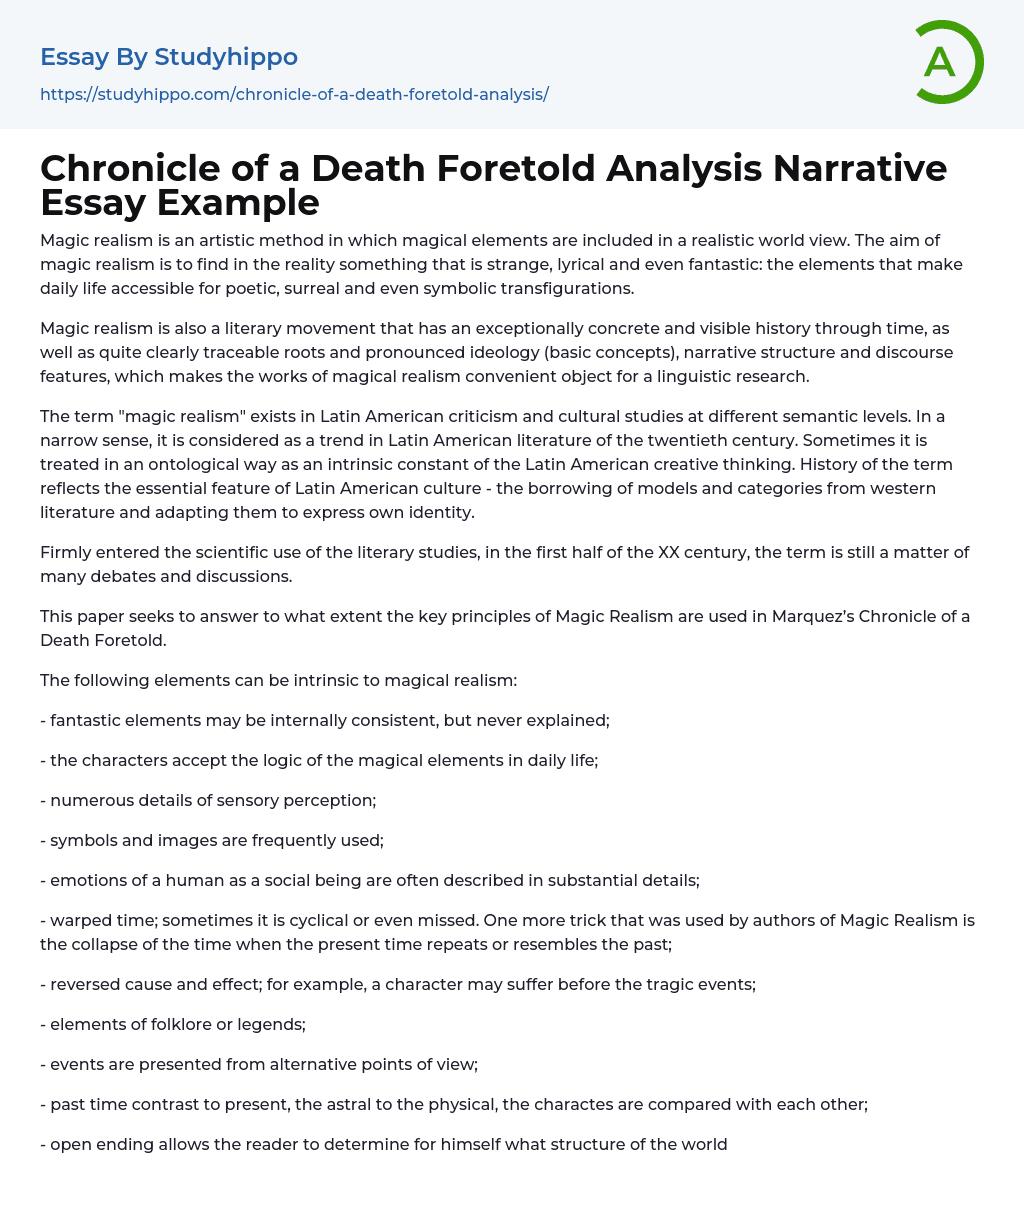 Chronicle of a Death Foretold Analysis Narrative Essay Example